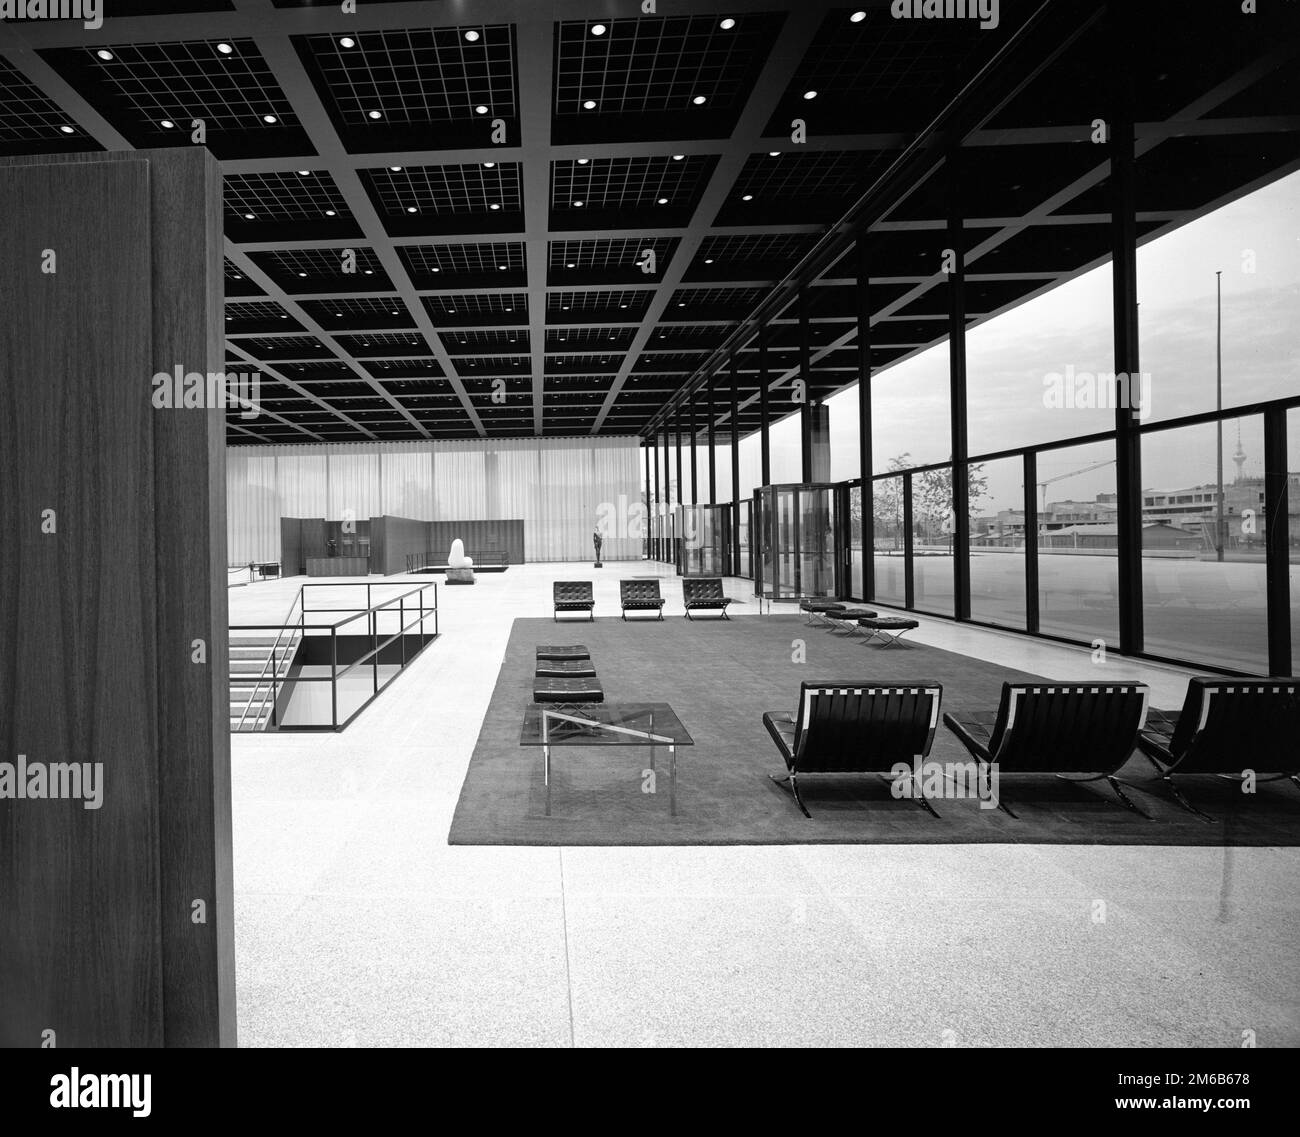 Mies van der Rohe. The Neue Nationalgalerie (New National Gallery) in Berlin, designed by the German / American architect, Ludwig Mies van der Rohe (1886-1969), 1968 Stock Photo